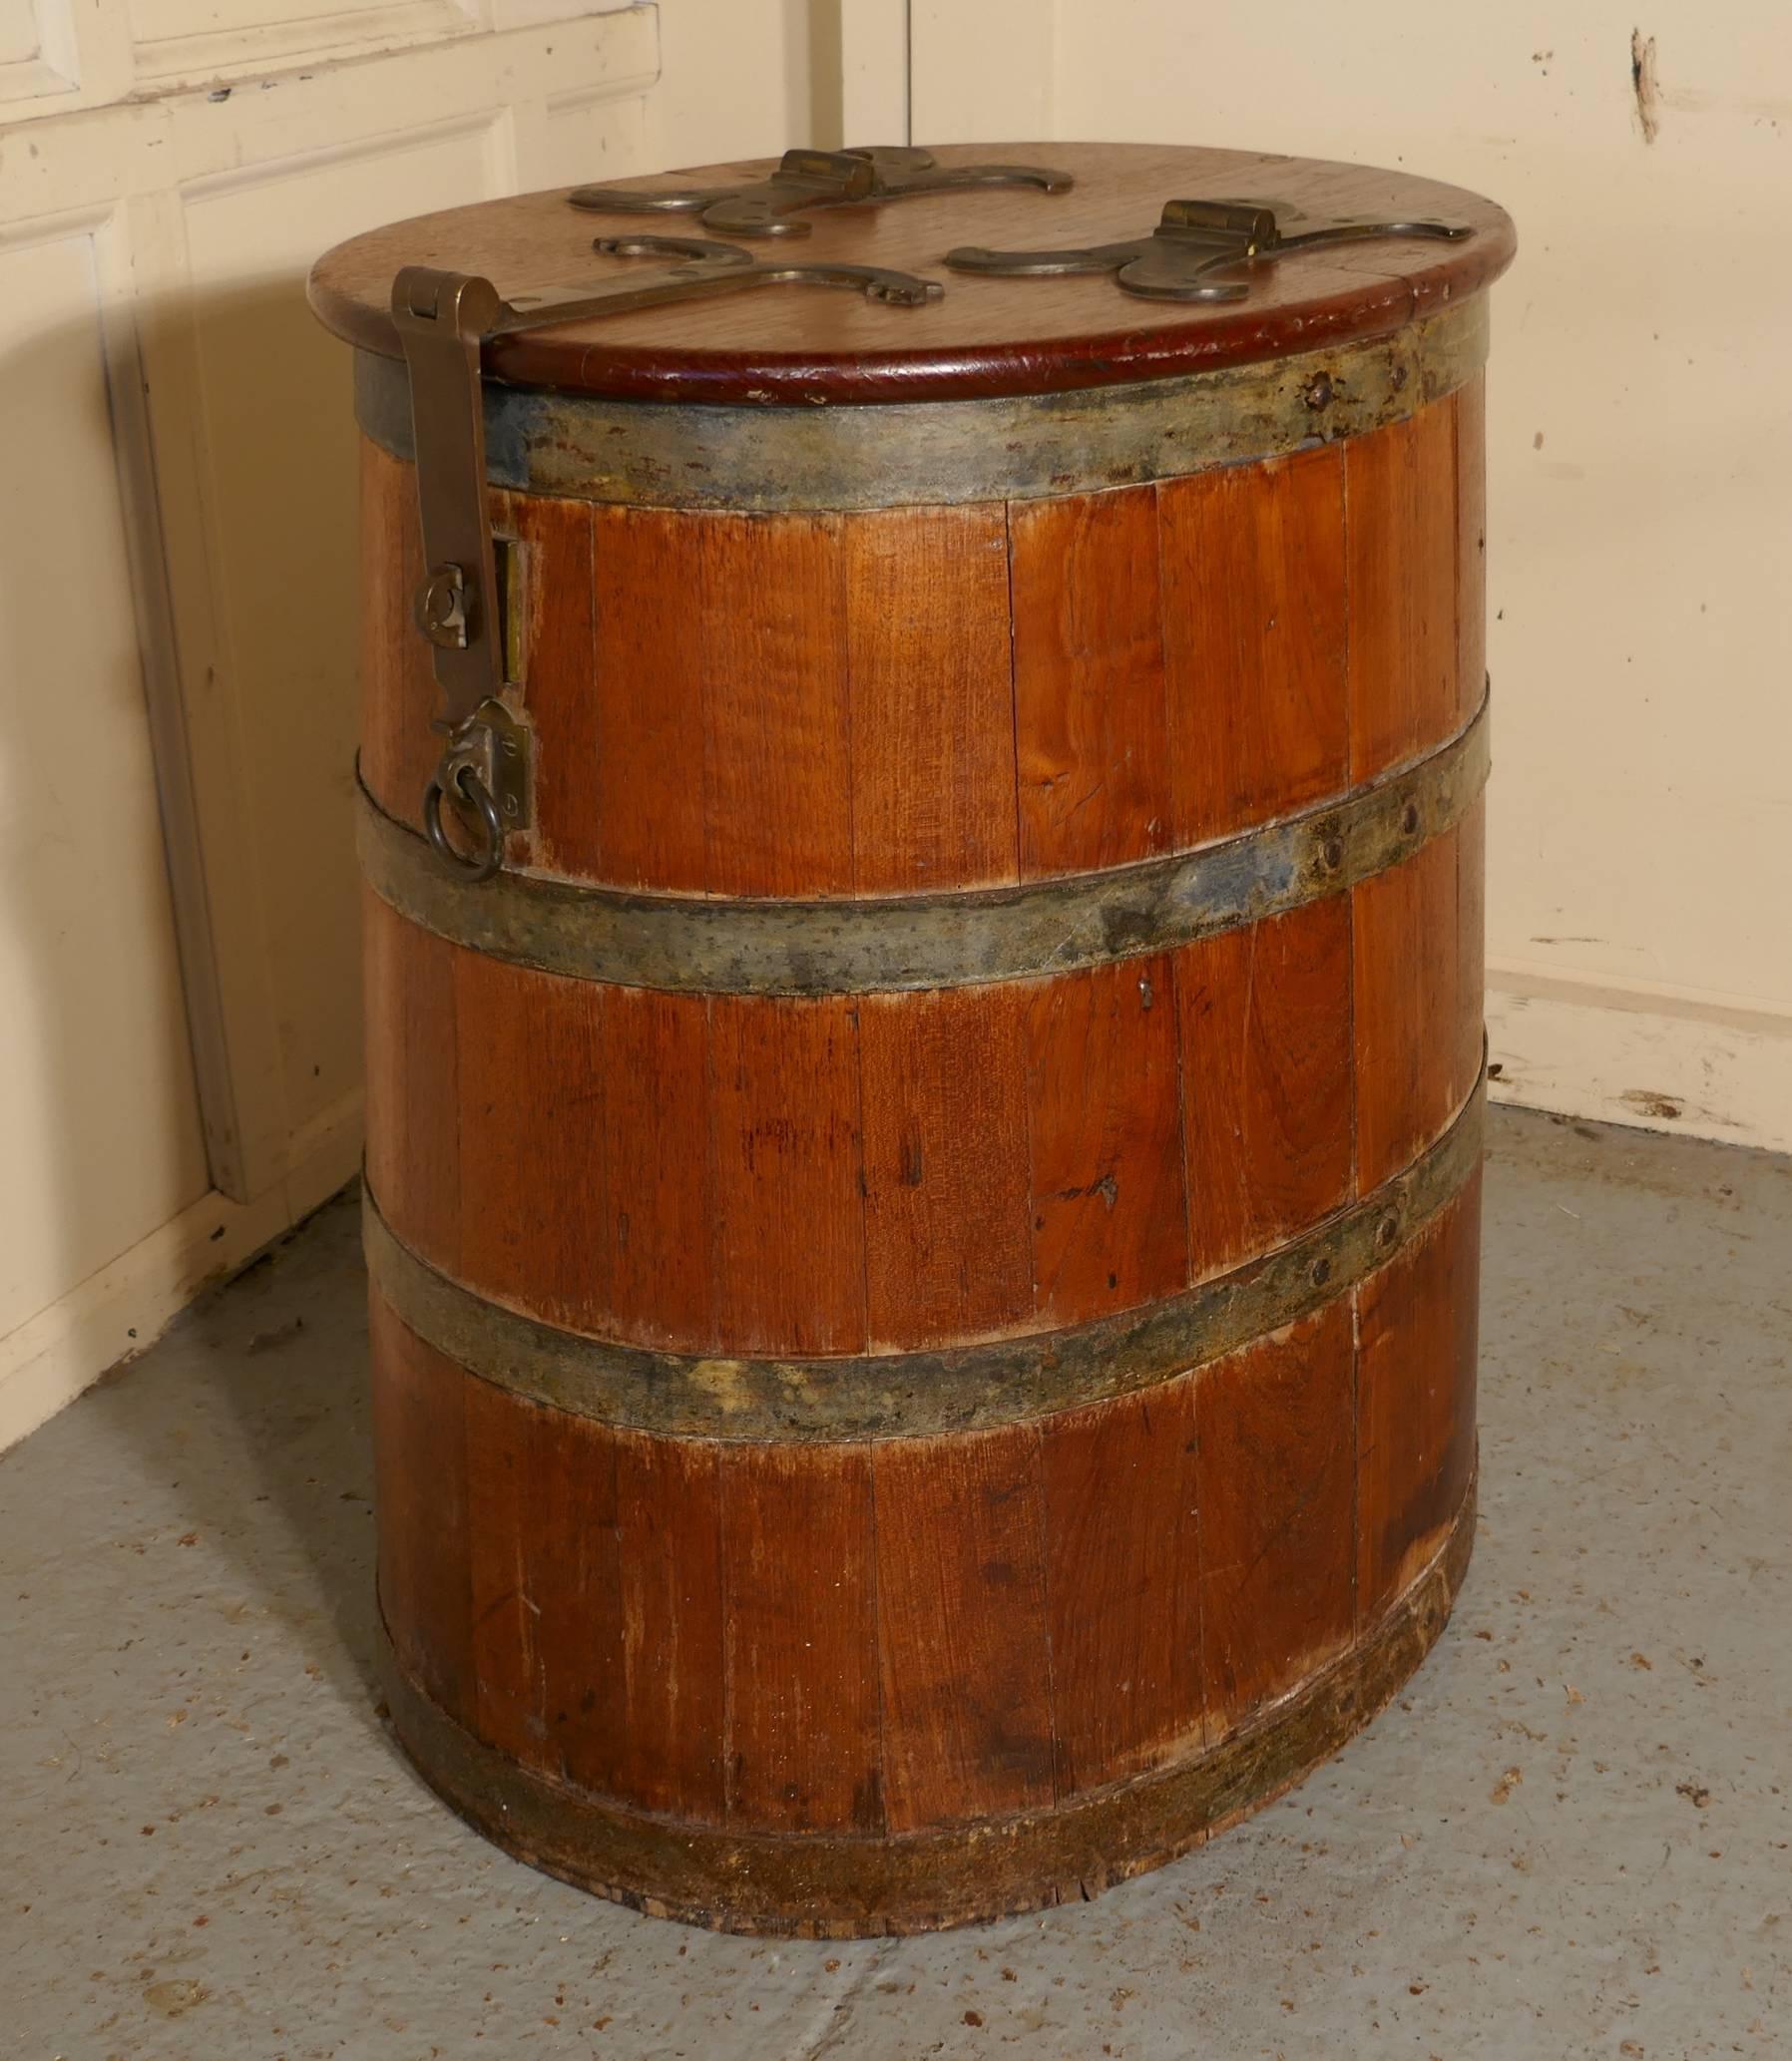 18th century ships salt beef barrel, oak and brass ships storage tub

A survivor from the 18th century, this excellent piece would have been used for storing “Salt Beef” the only way at this time that meat could be stored for life at sea

The